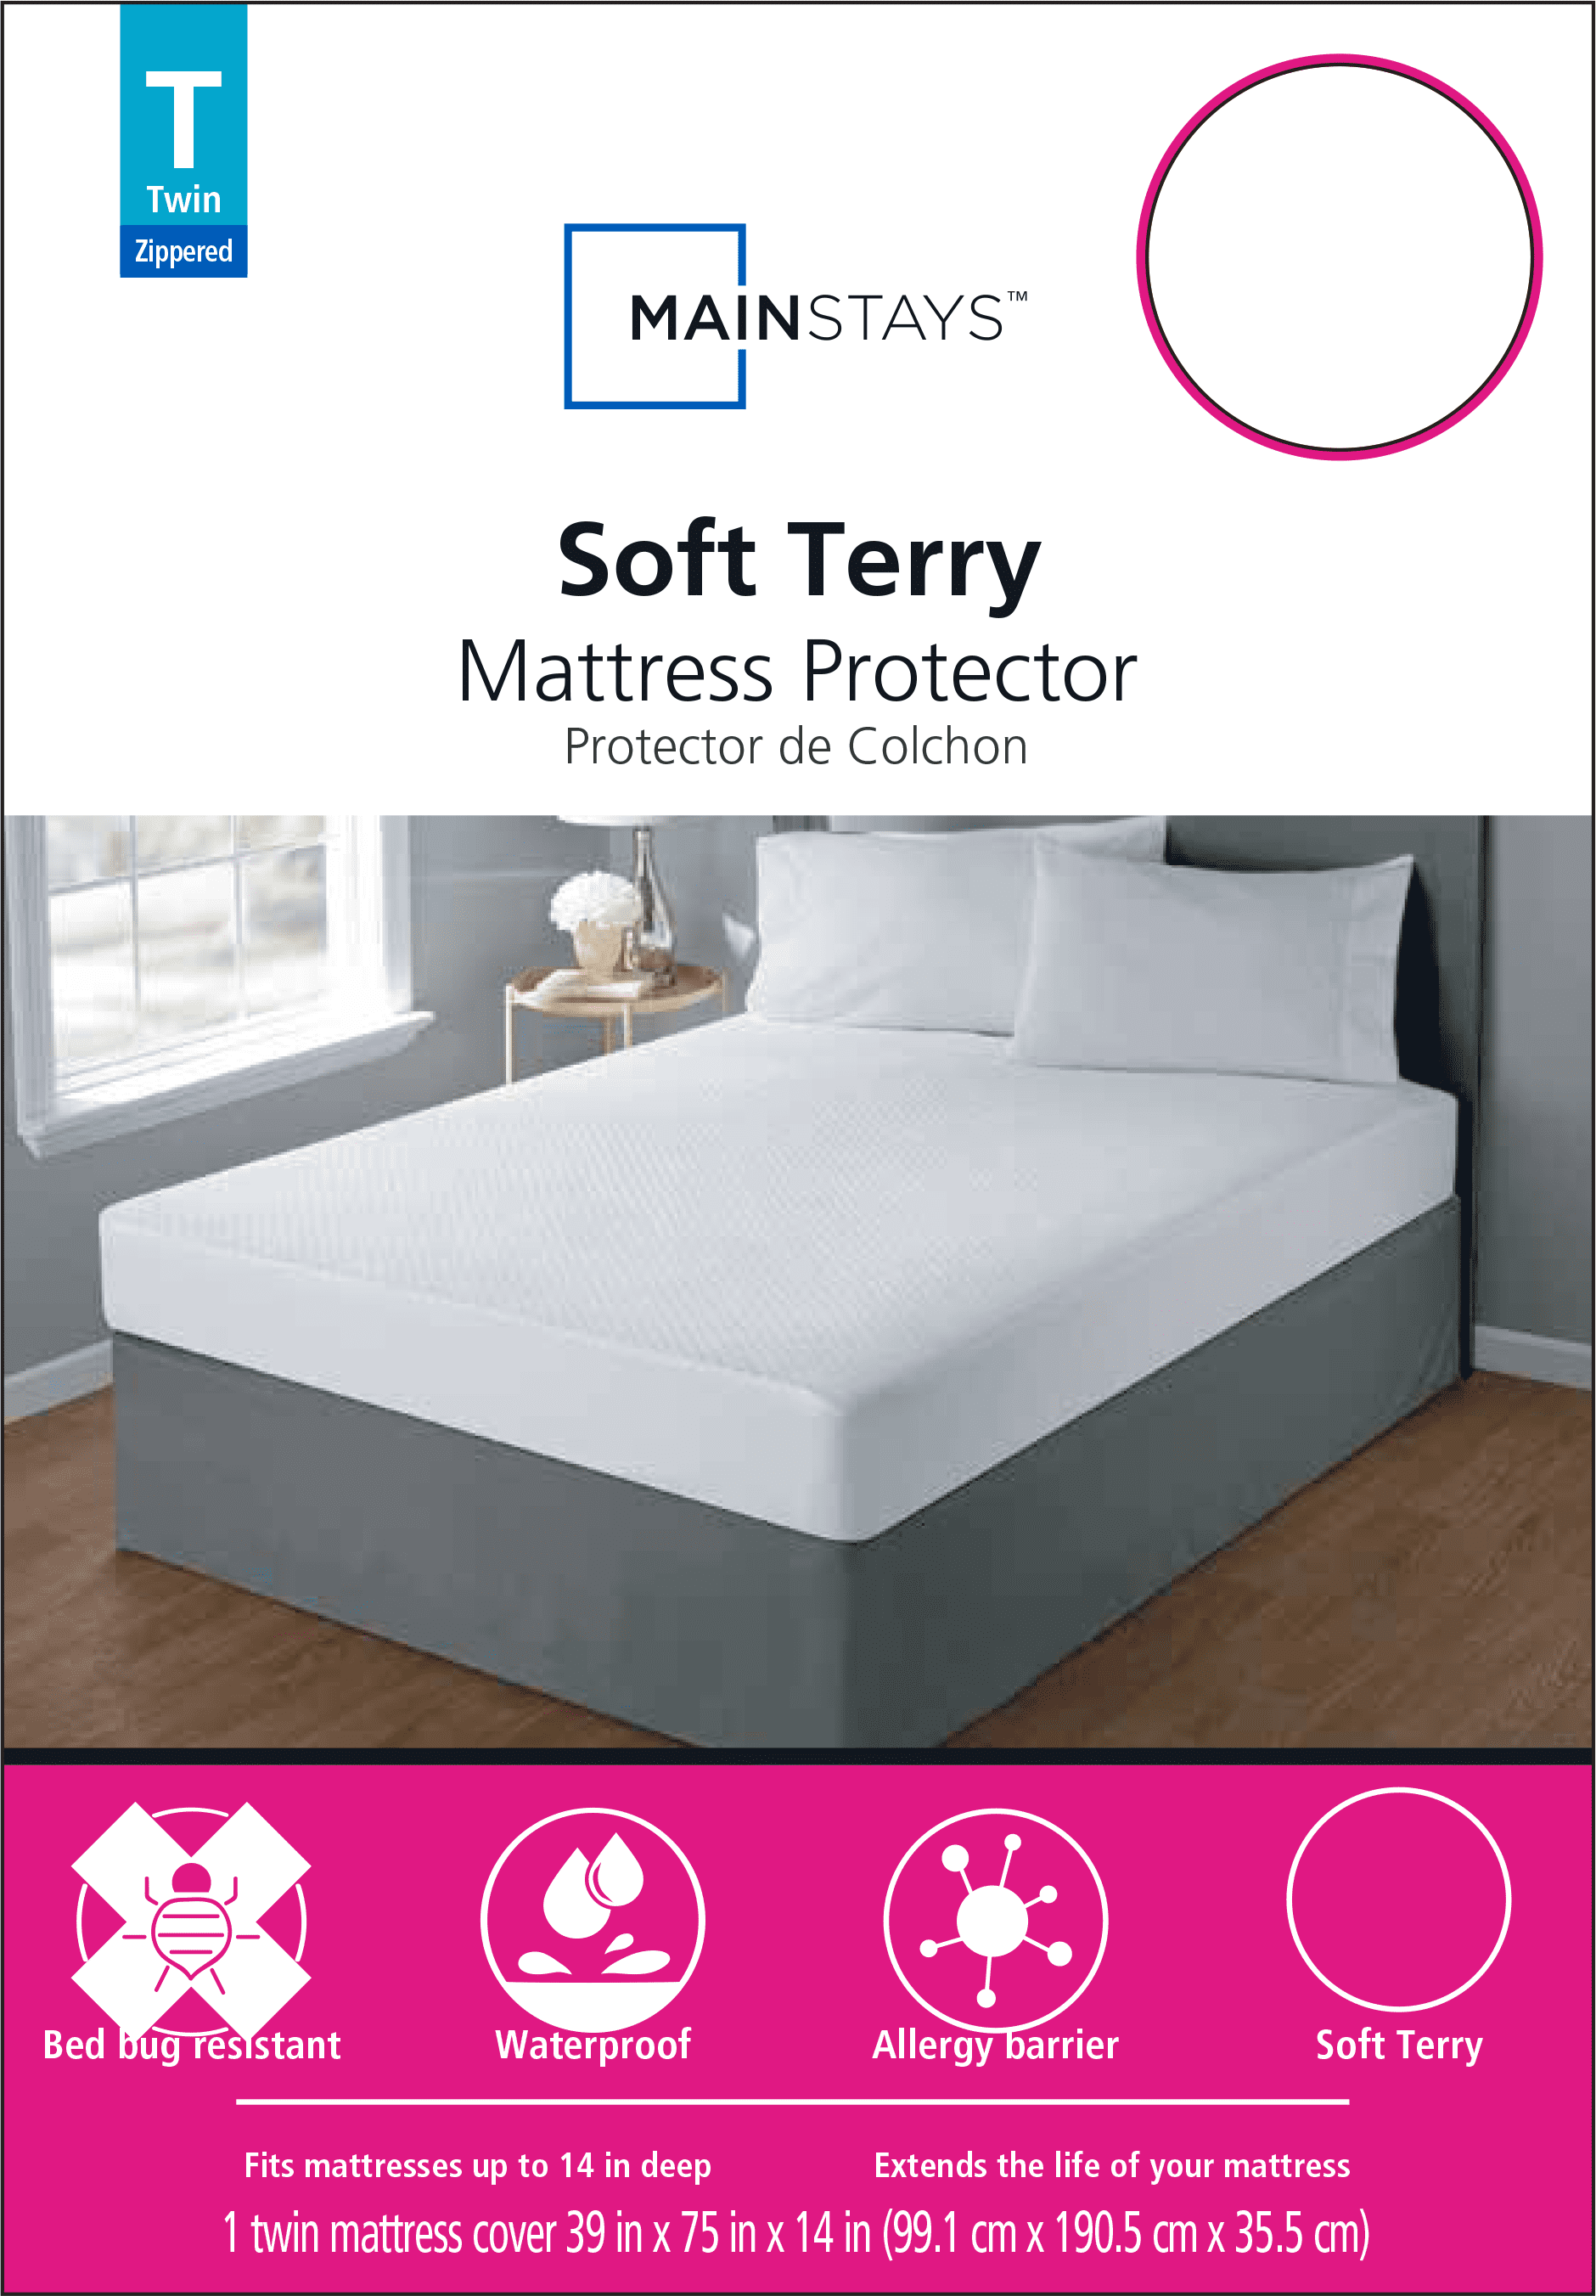 2 x Travel Cot Fitted Sheet  Waterproof 100% Terry Cotton,Size 95 cm x 65 cm. 